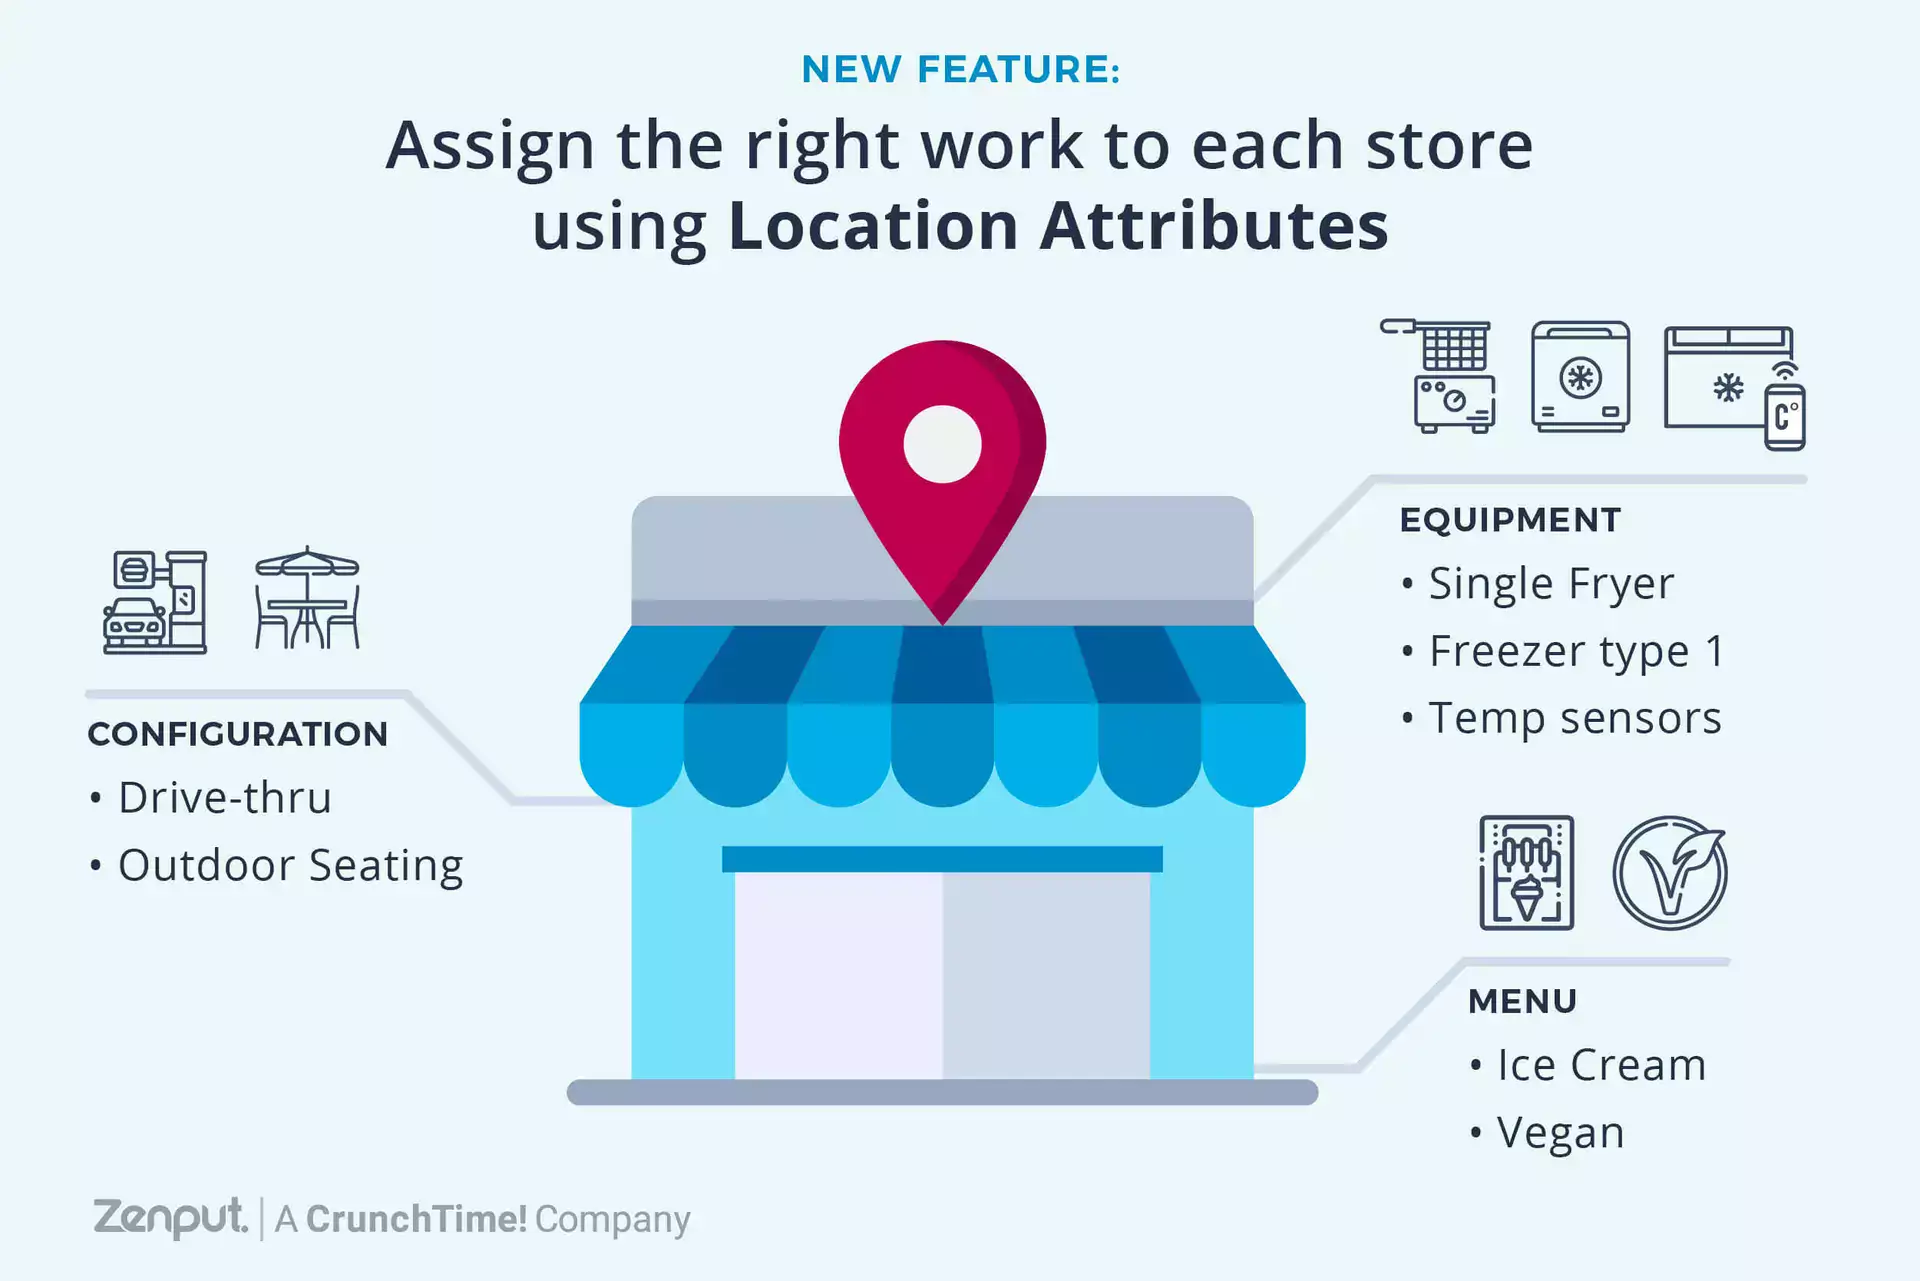 new feature for Zenput: use Location Attributes to drive and assign the right work in each store